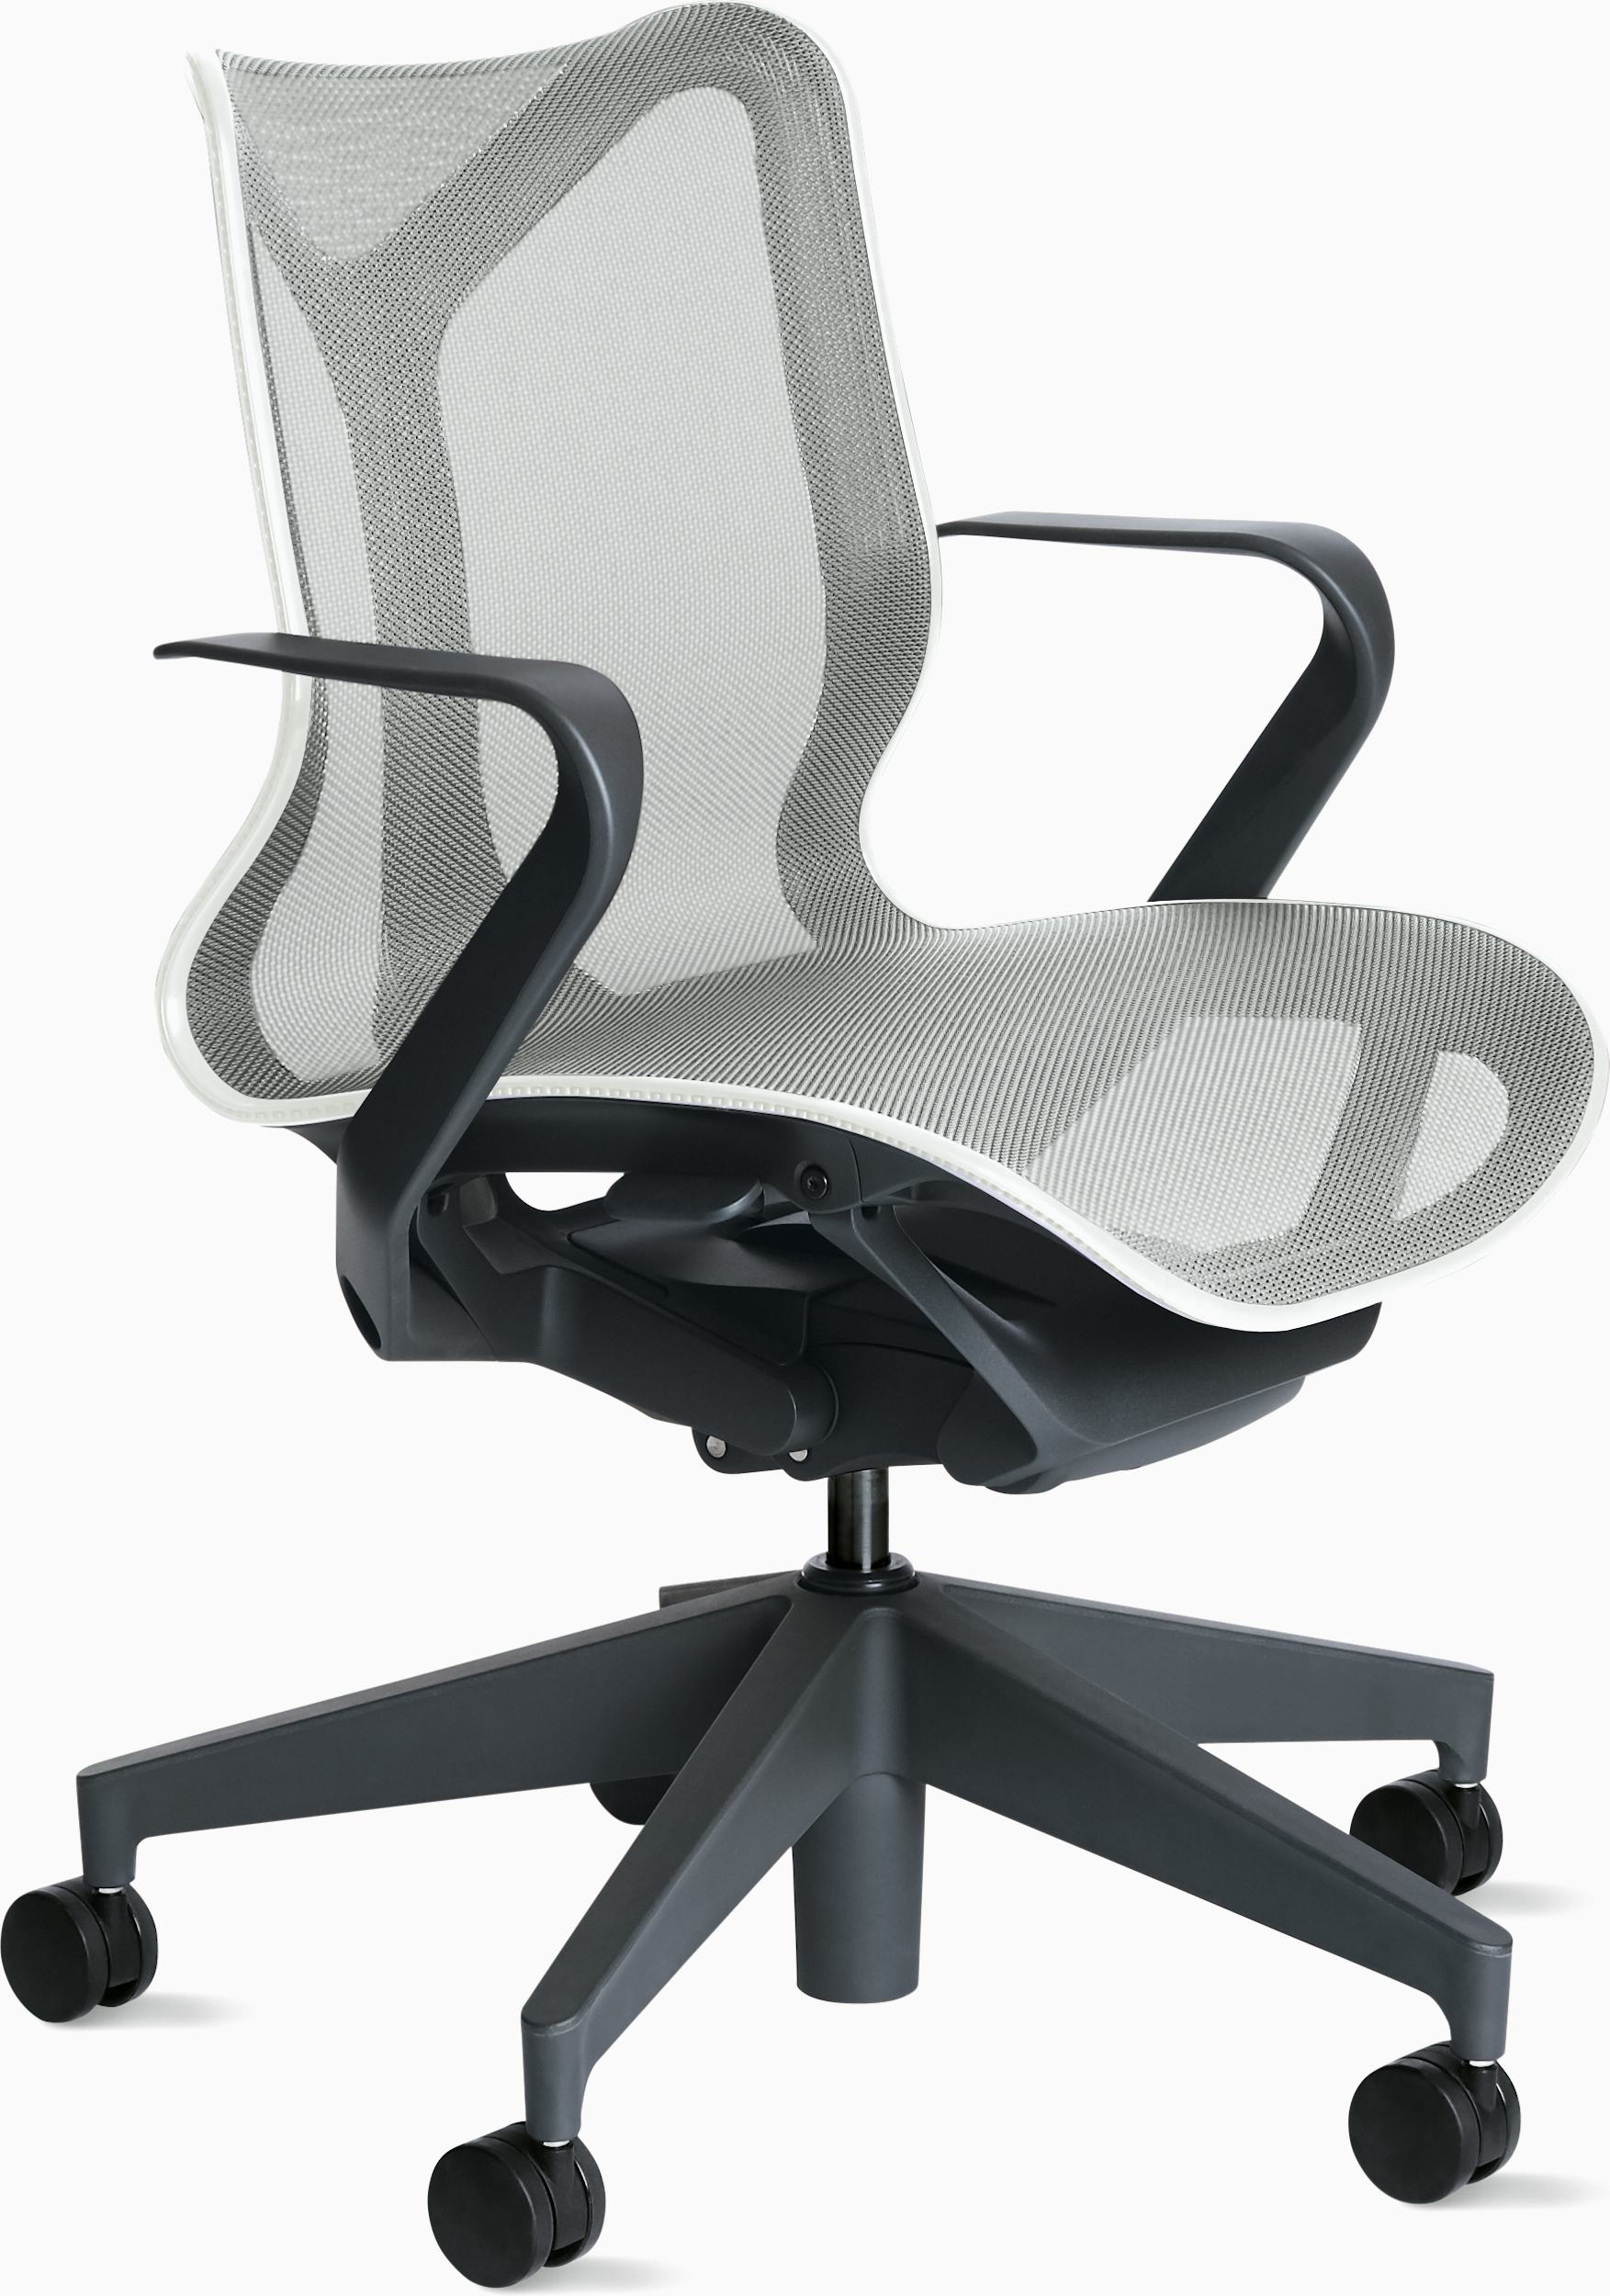 Low-Back Mesh Armless Office Chair,Swivel Rolling Computer Chair No Ar